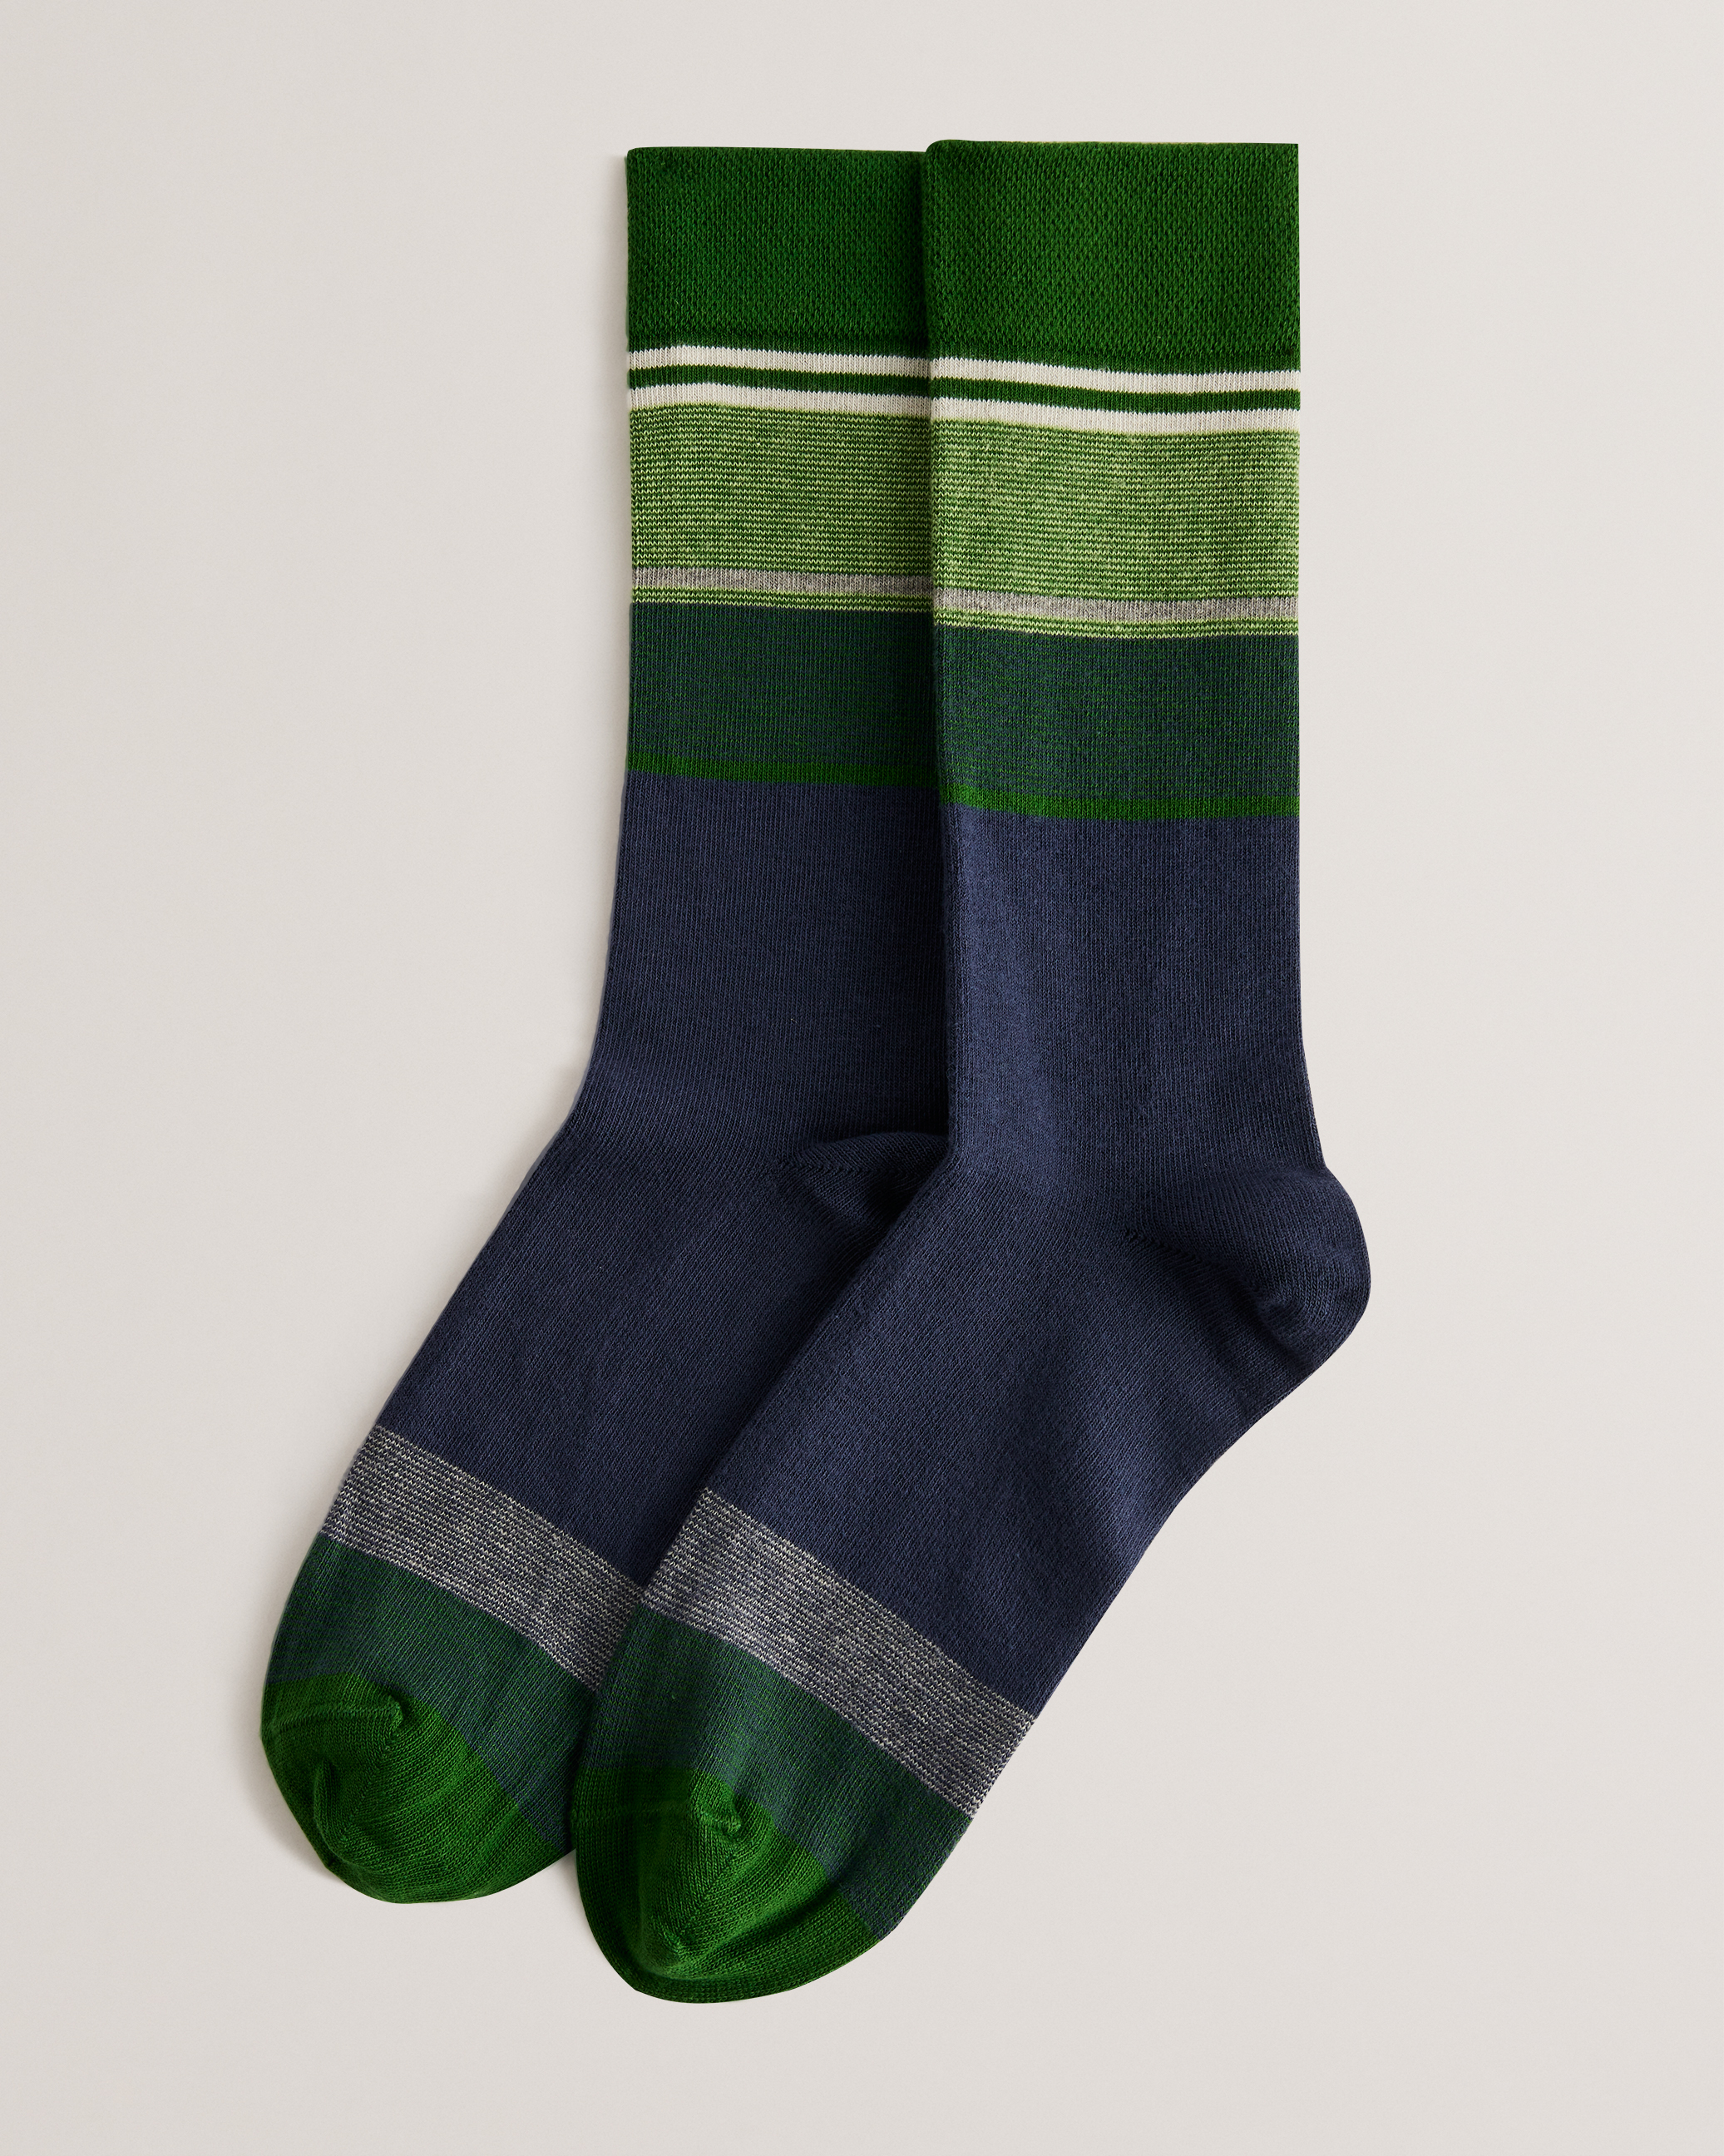 Ted Baker Socks On Sale South Africa - Multicolor Reddpak Three Pack Of  Menss